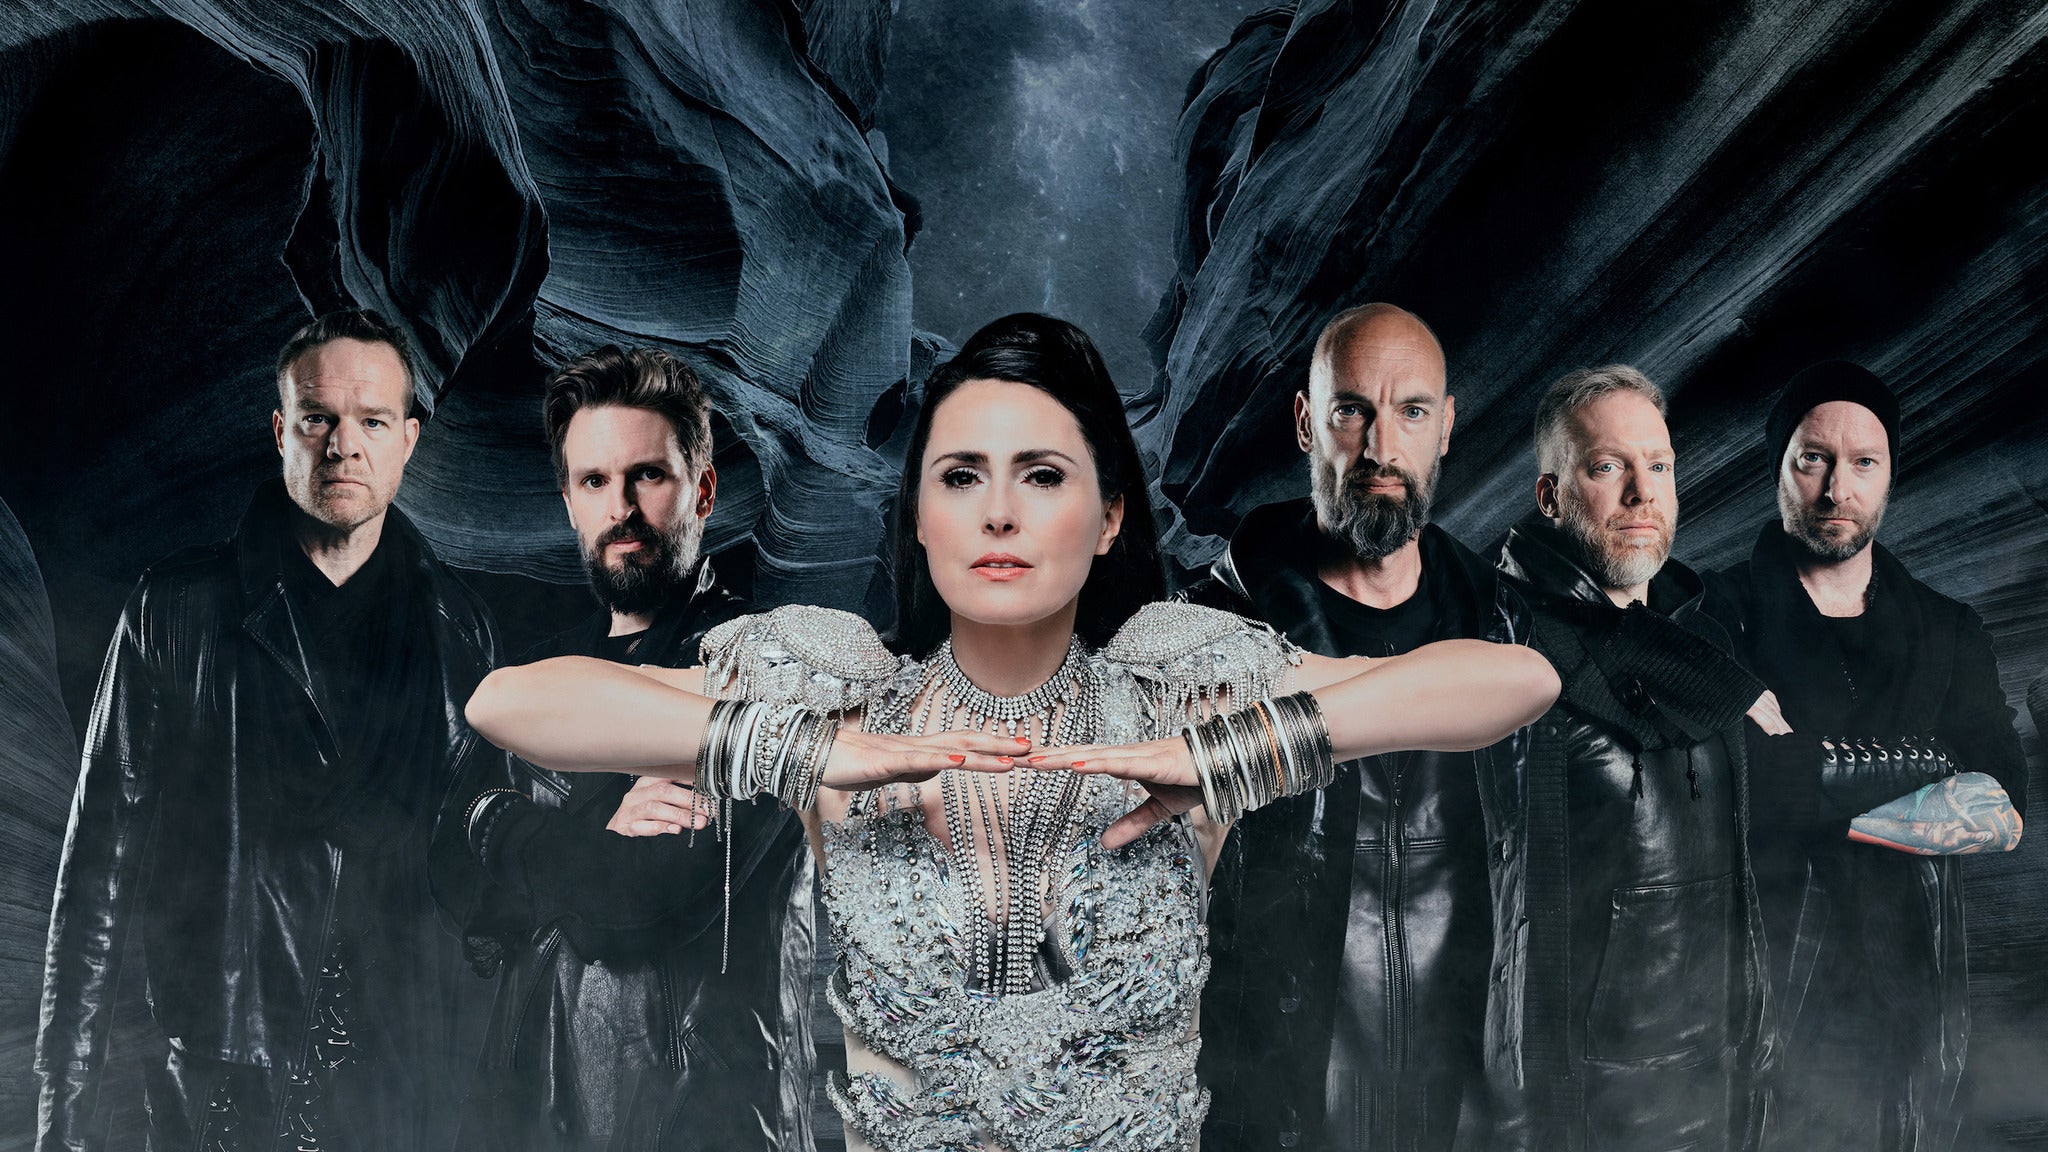 Image used with permission from Ticketmaster | Within Temptation tickets